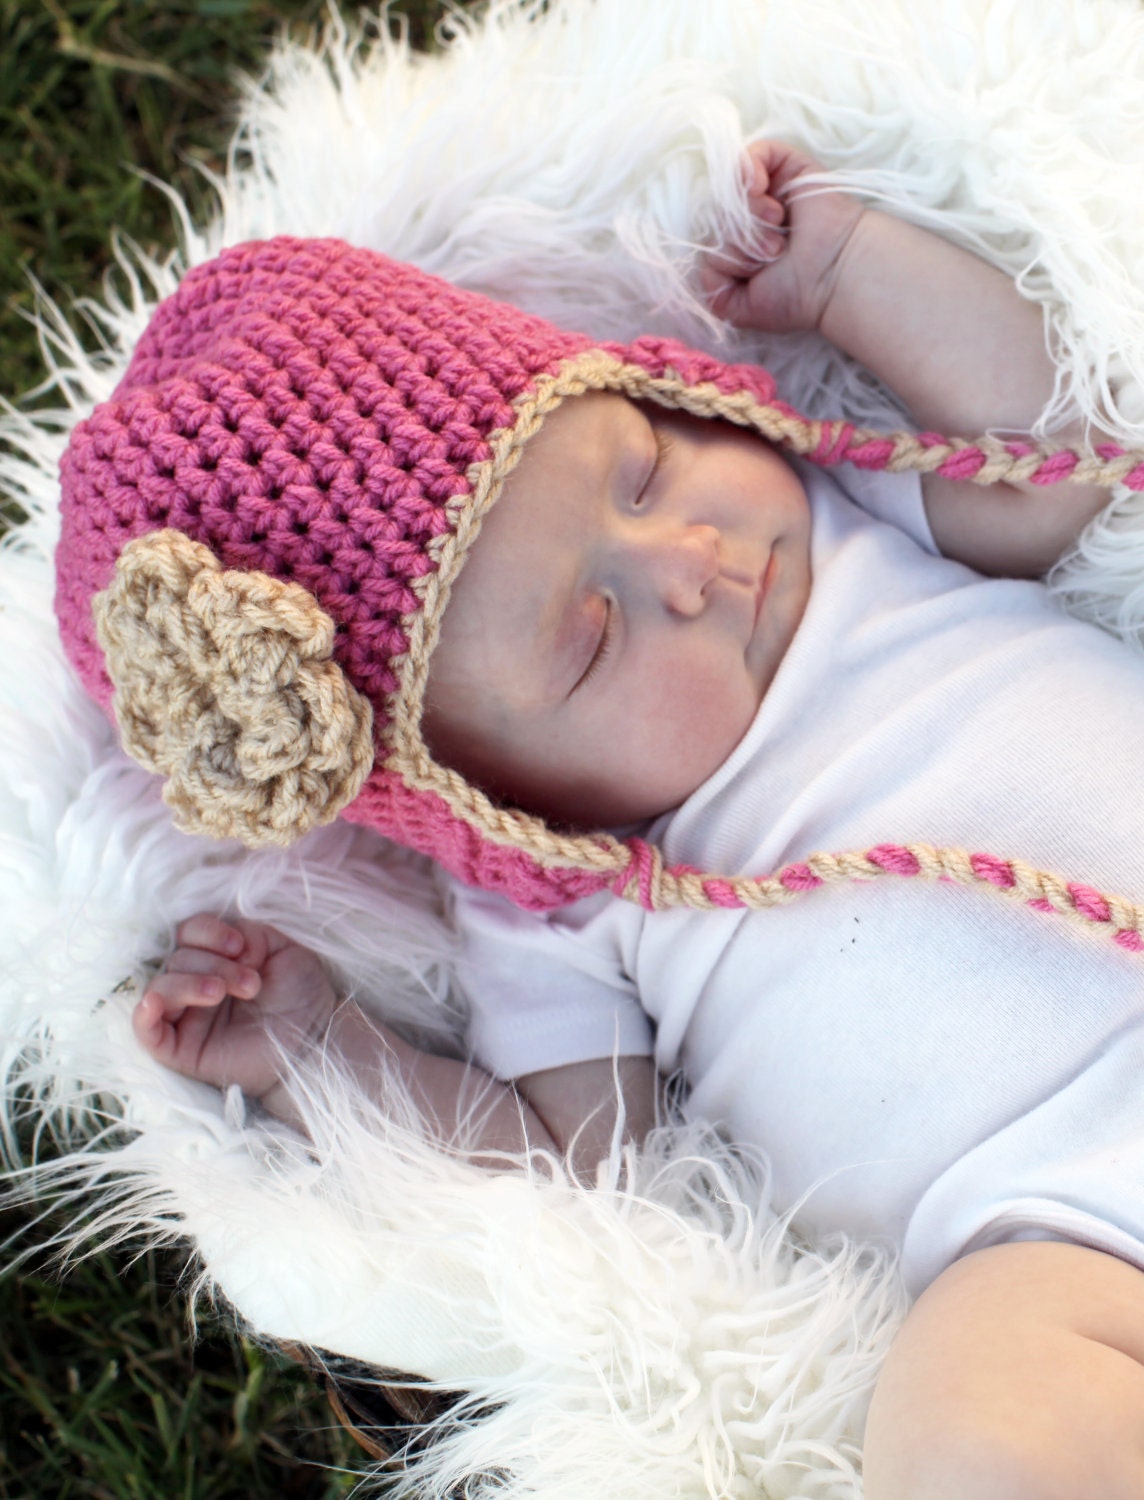 Crochet Baby Earflap Hat - Baby Ear Flap Hat - Baby Girl Beanie - 3 - 6 months - Made to Order - You choose the colors - MyStitchInTime